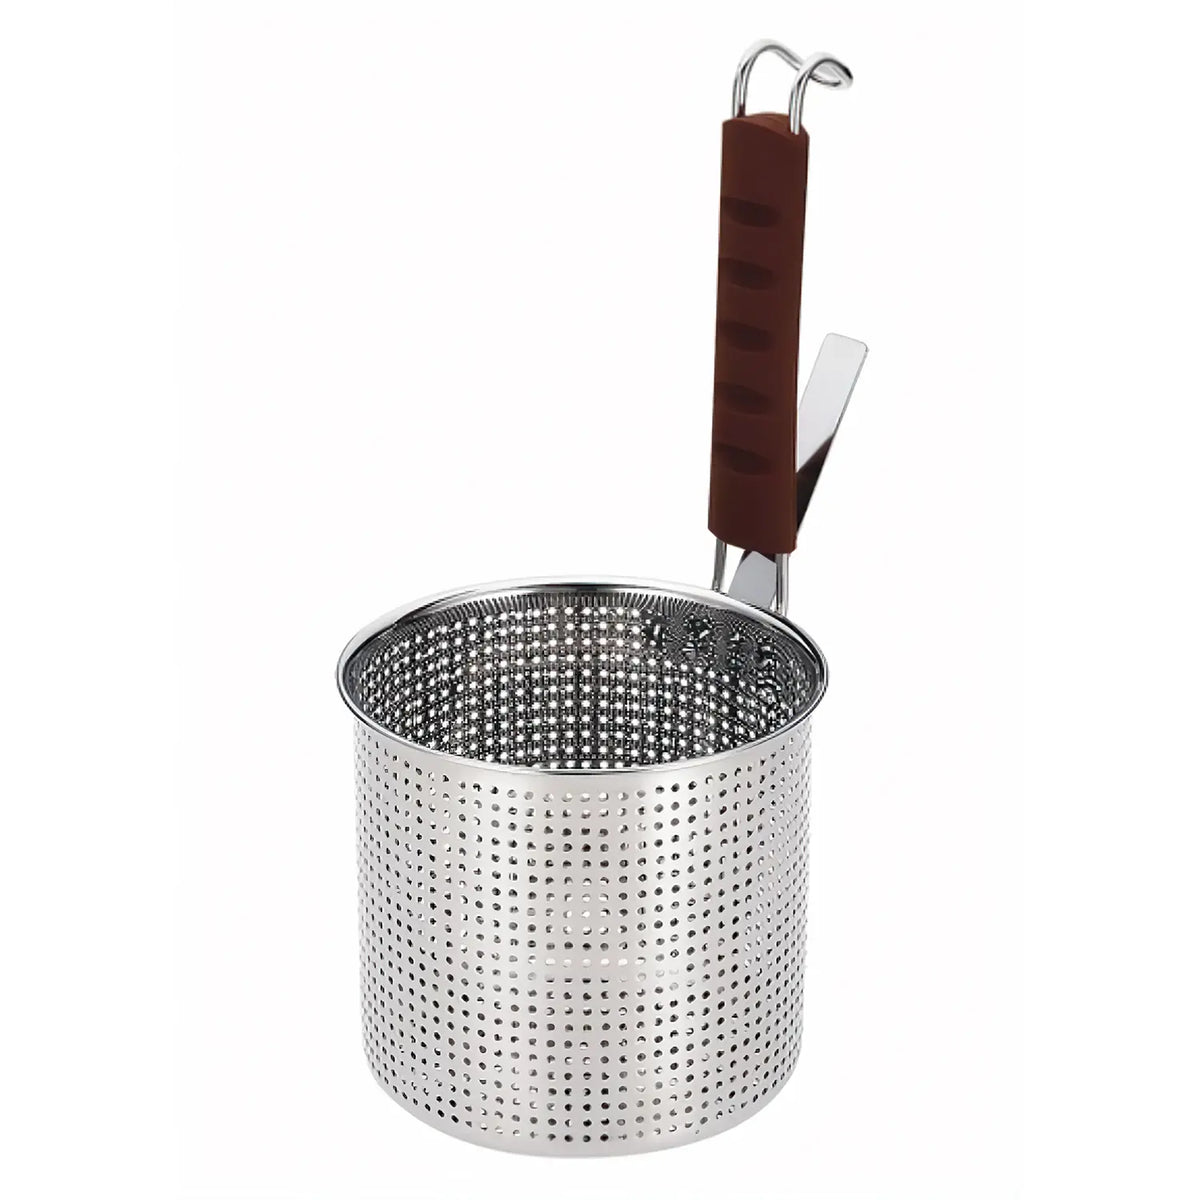 YUKIWA Stainless Steel Perforated Tebo Noodle Strainer Flat Base with Silicone Handle